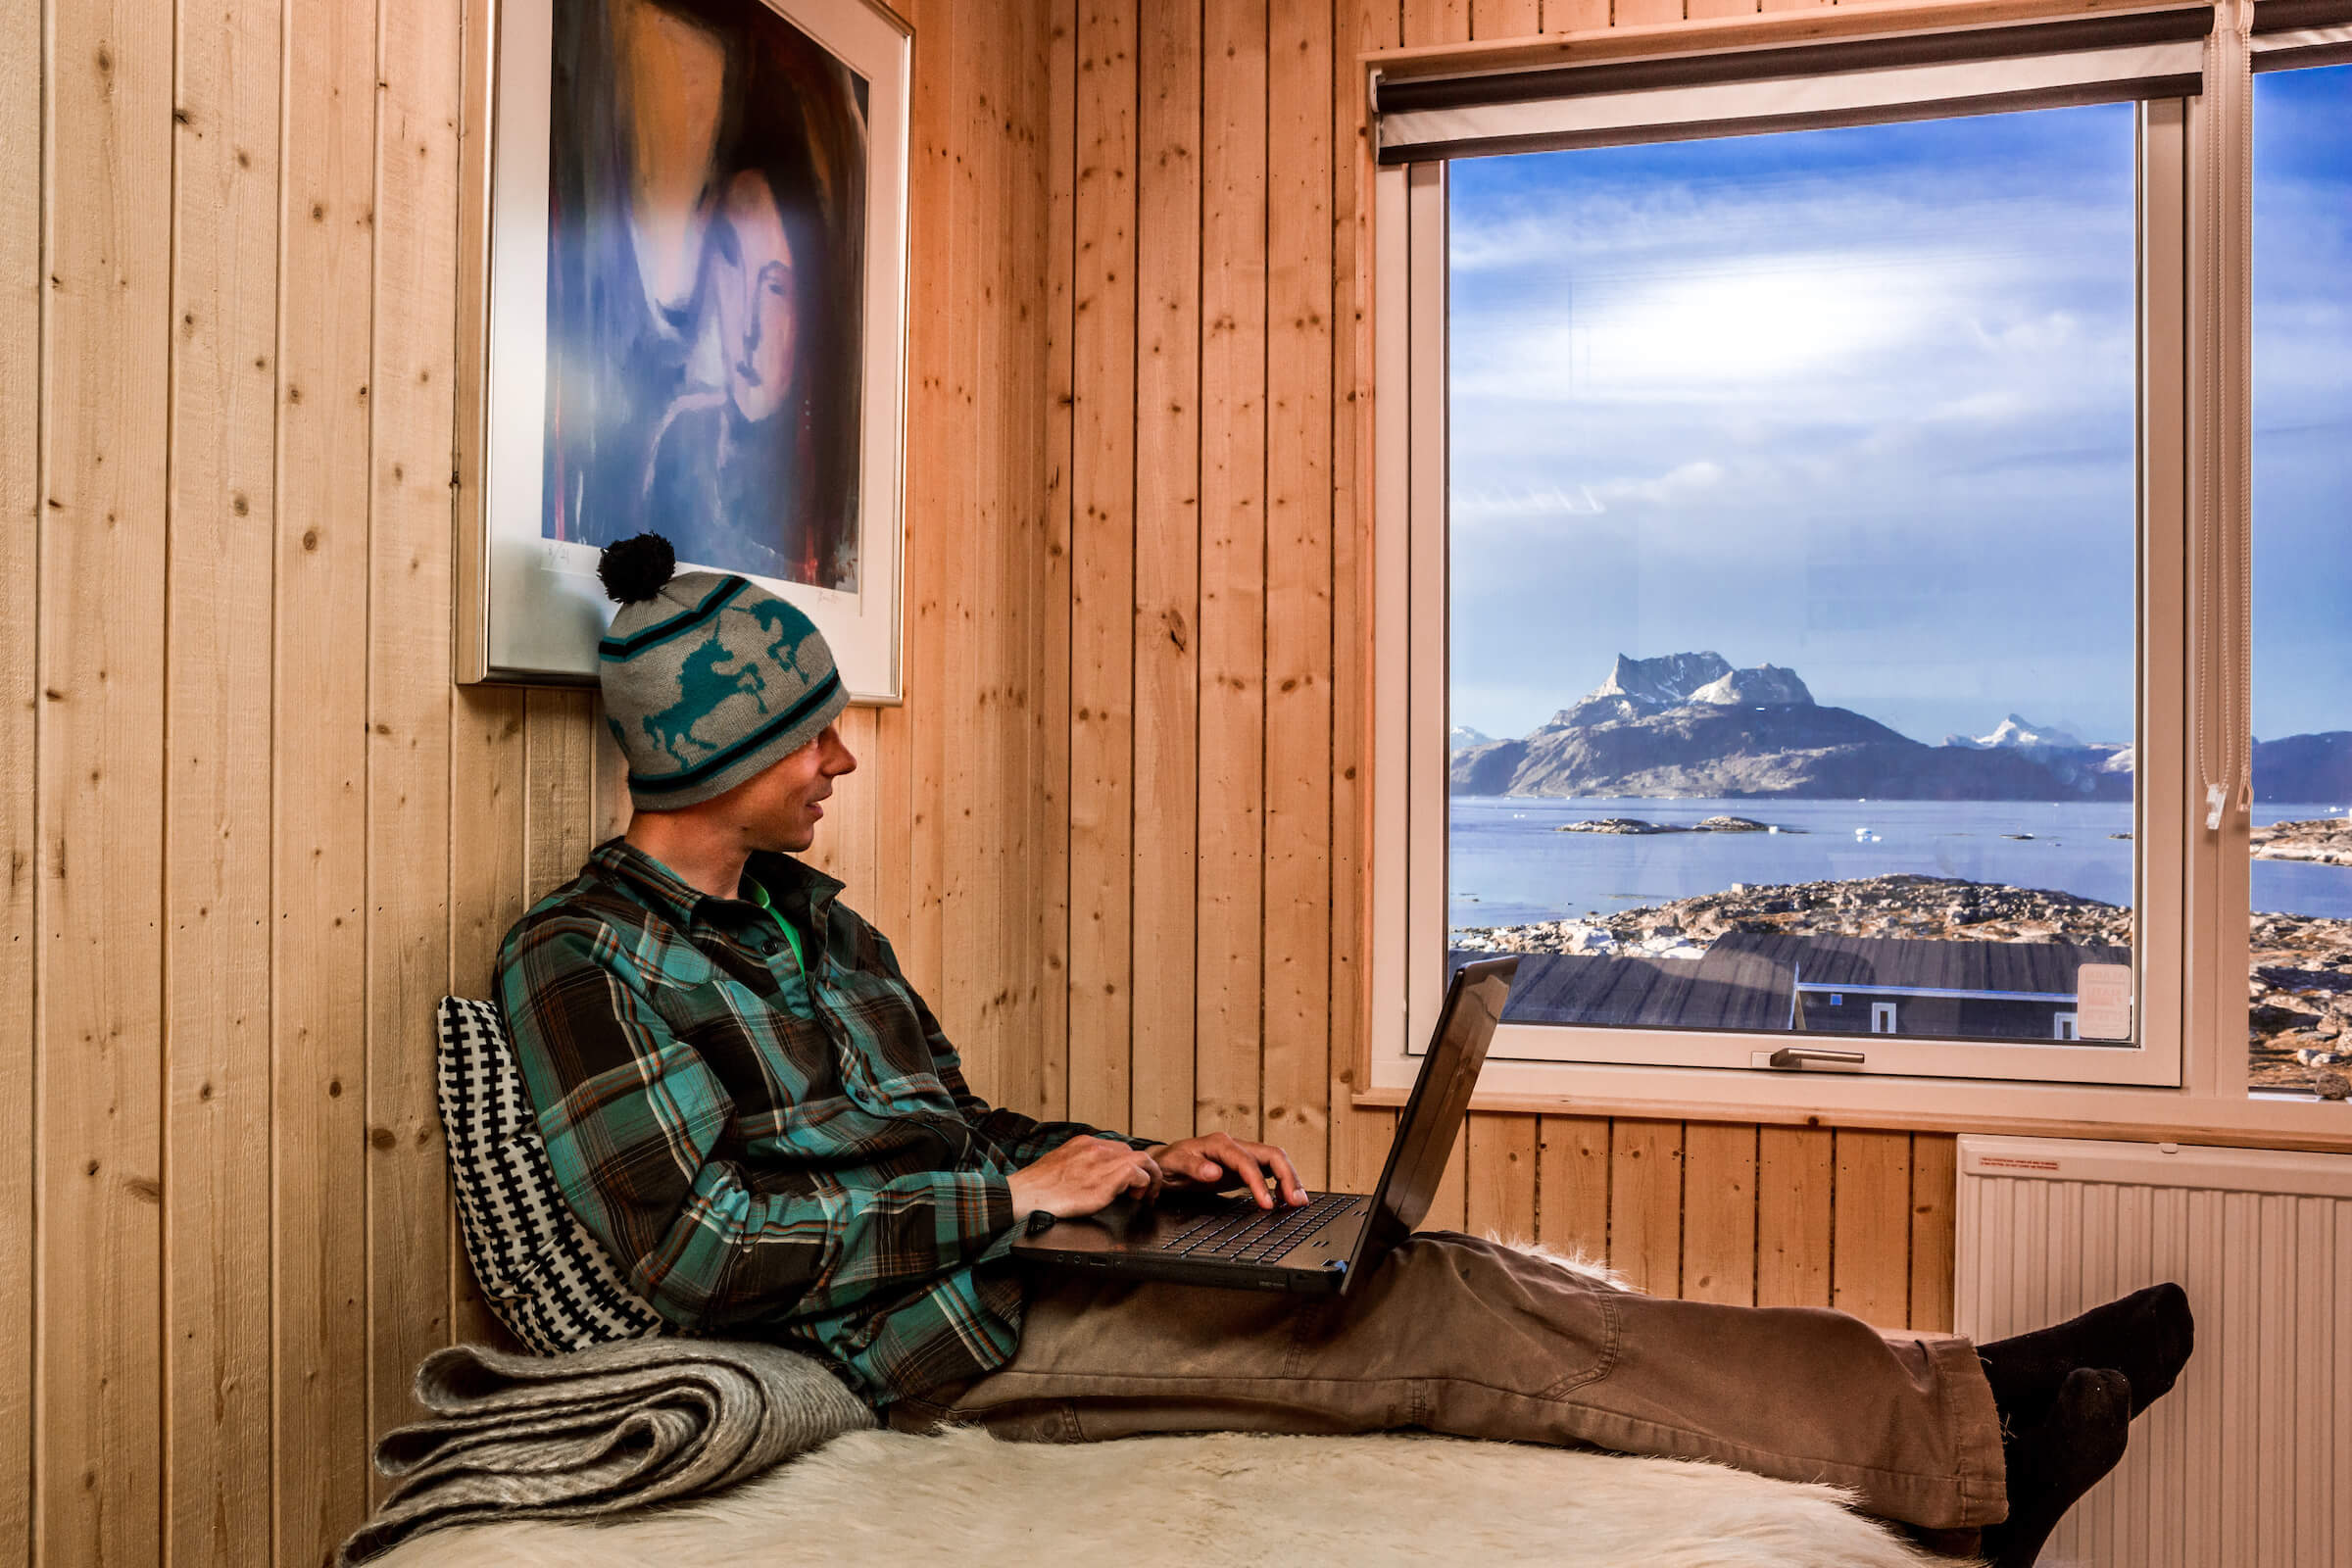 Traveler writes in his adventure log from the comfort of his bed at Inuk Hostels in Nuuk overlooking Nuuk Fjord and Sermitsiaq mountain. By Raven Eye Photography